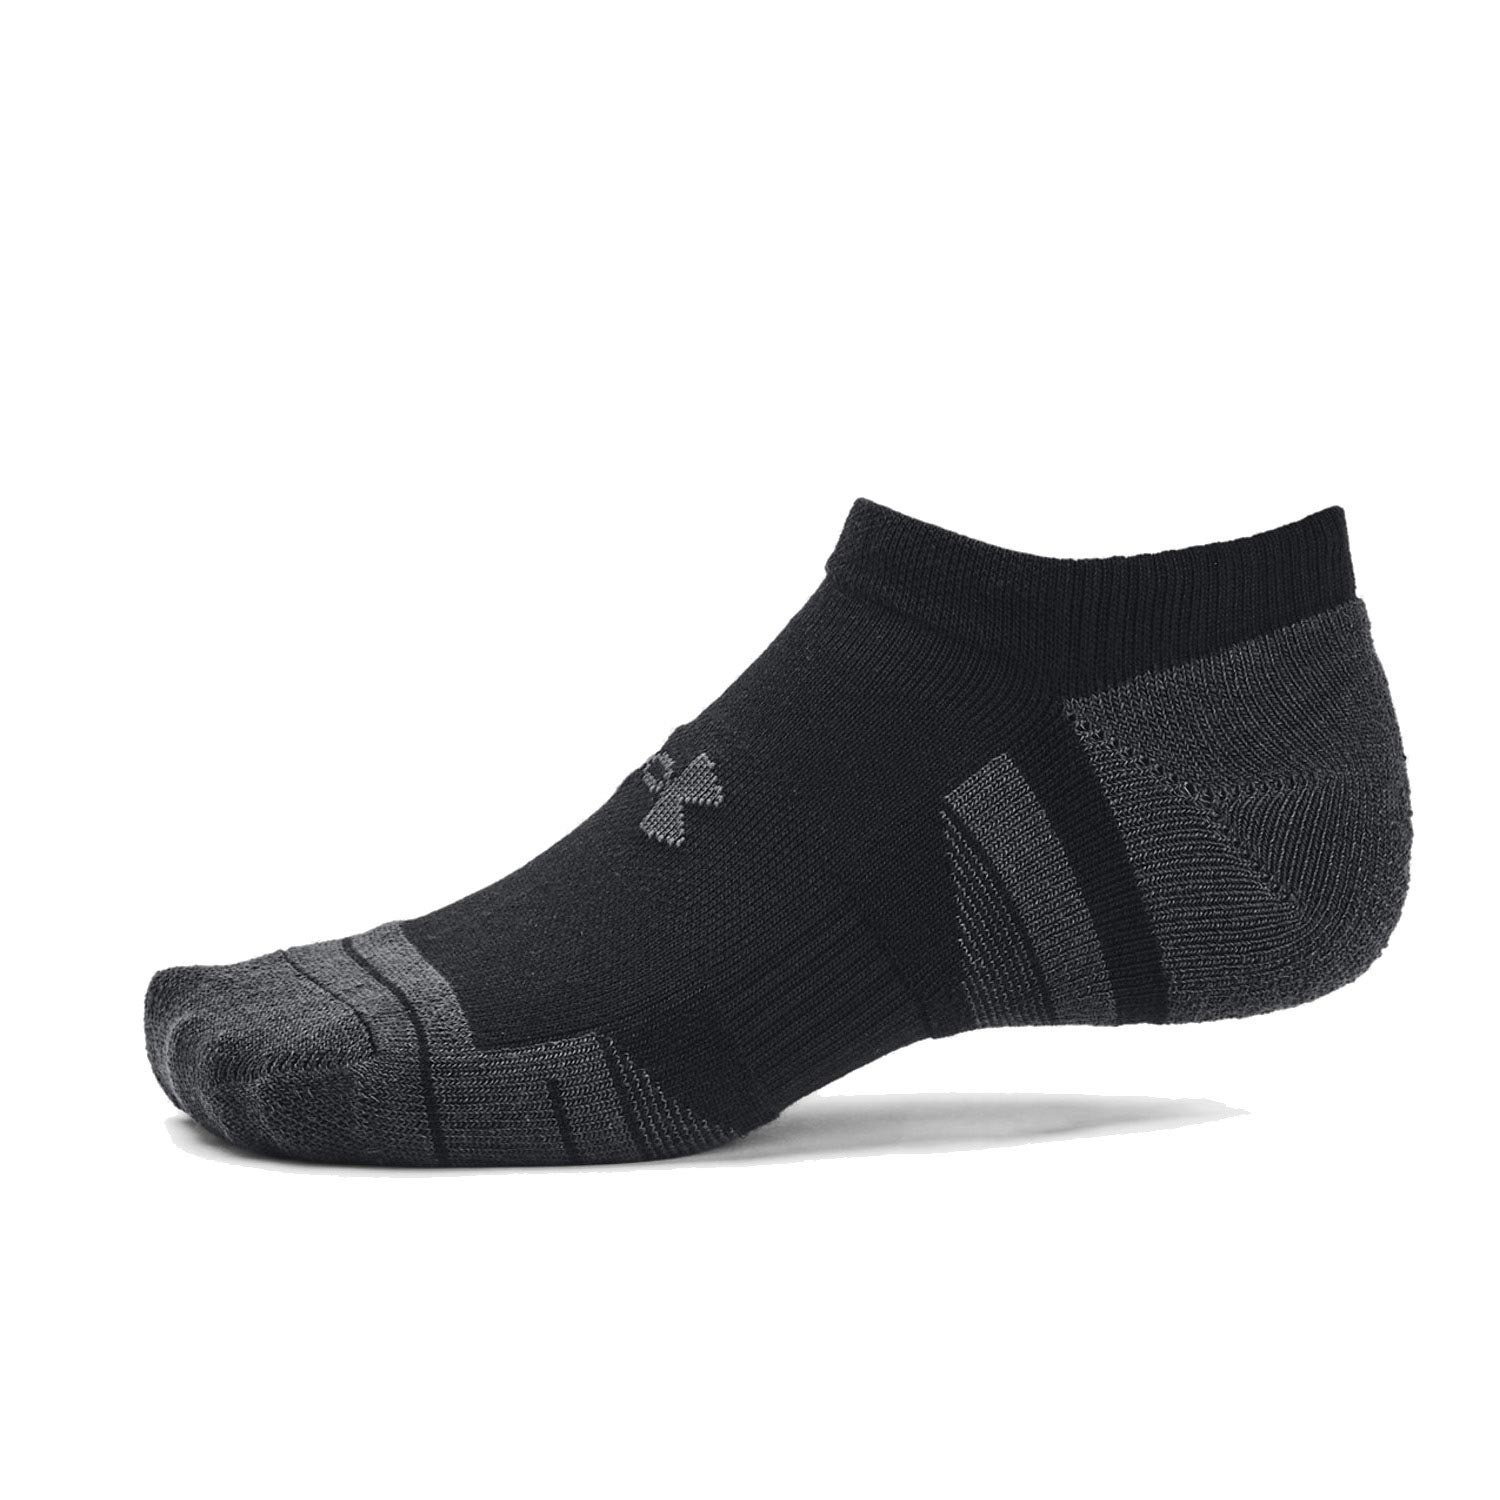 UNDER ARMOUR PERFORMANCE TECH 3 PACK NO SHOW SOCKS